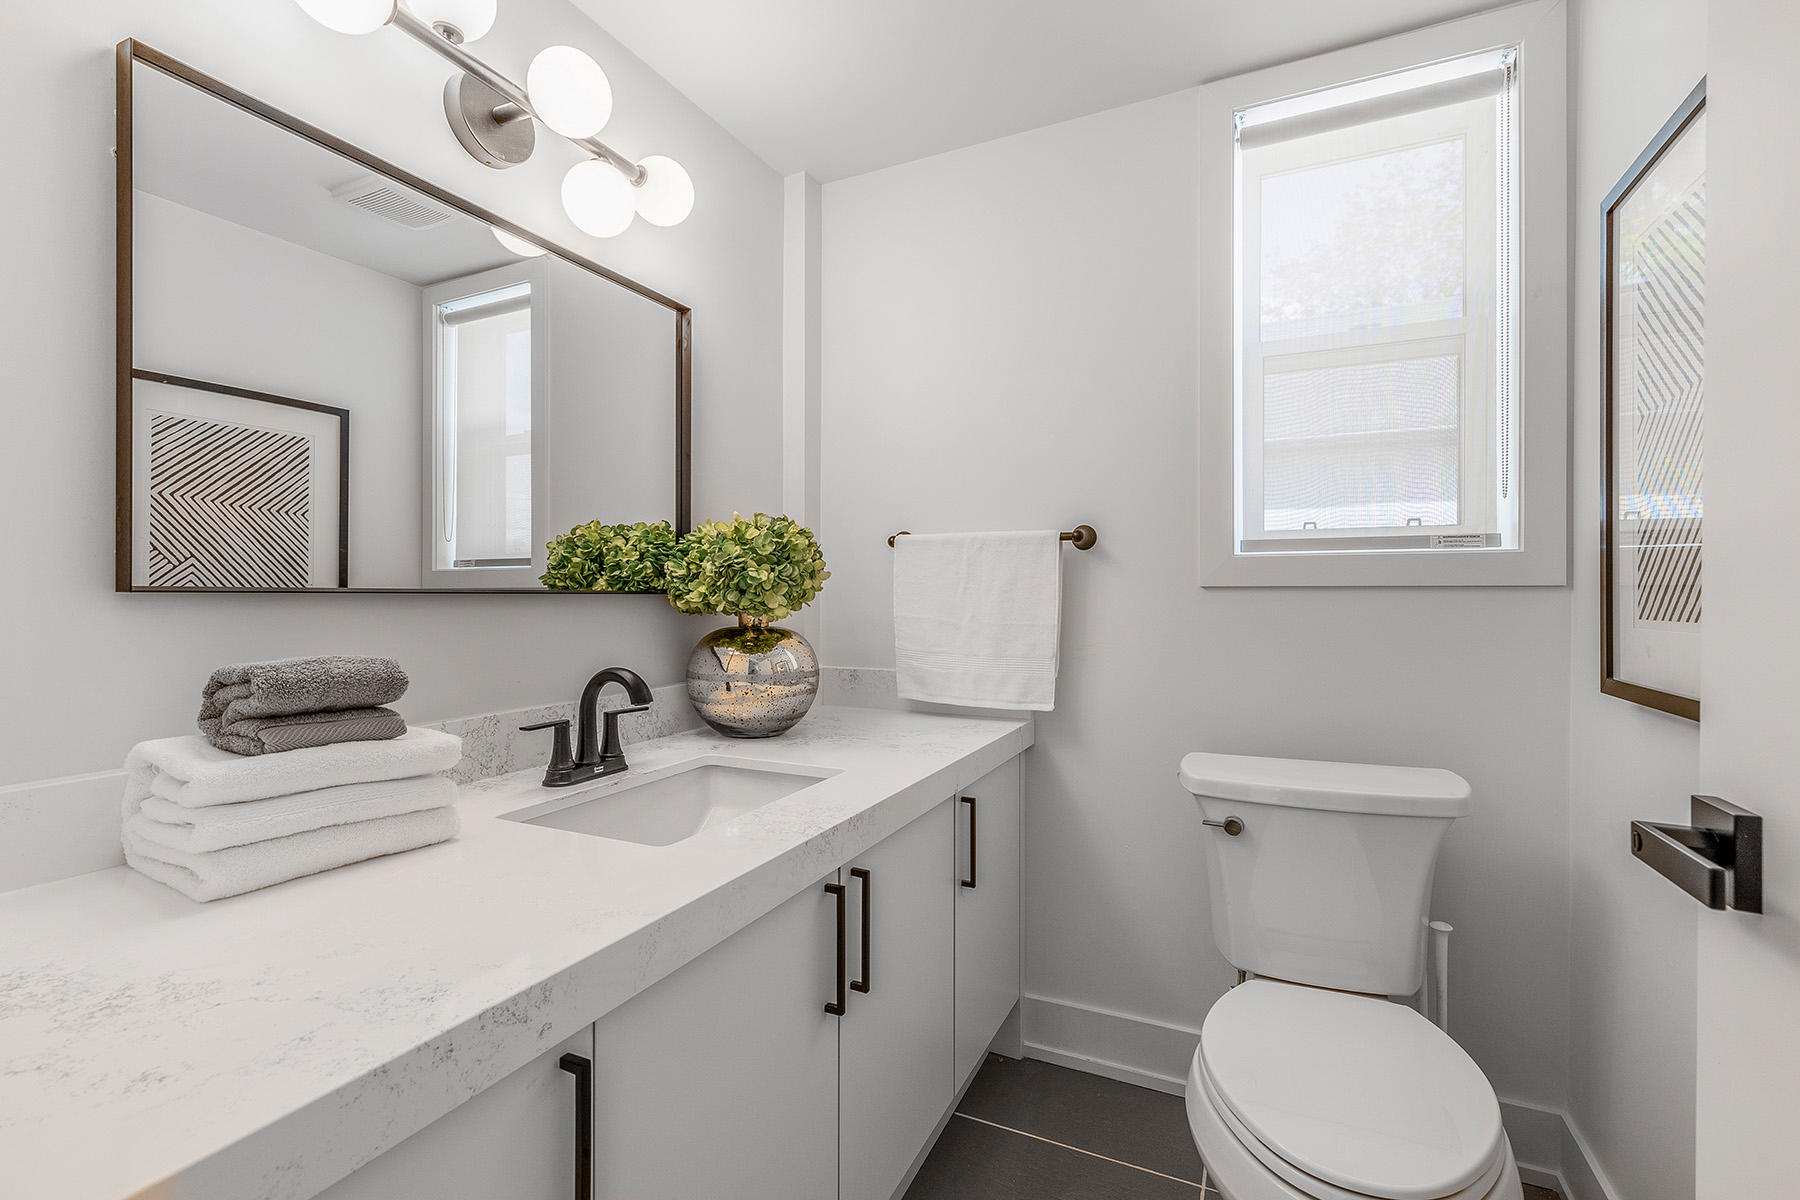 54 Huntington Avenue powder room with white marble counters and cabinets.